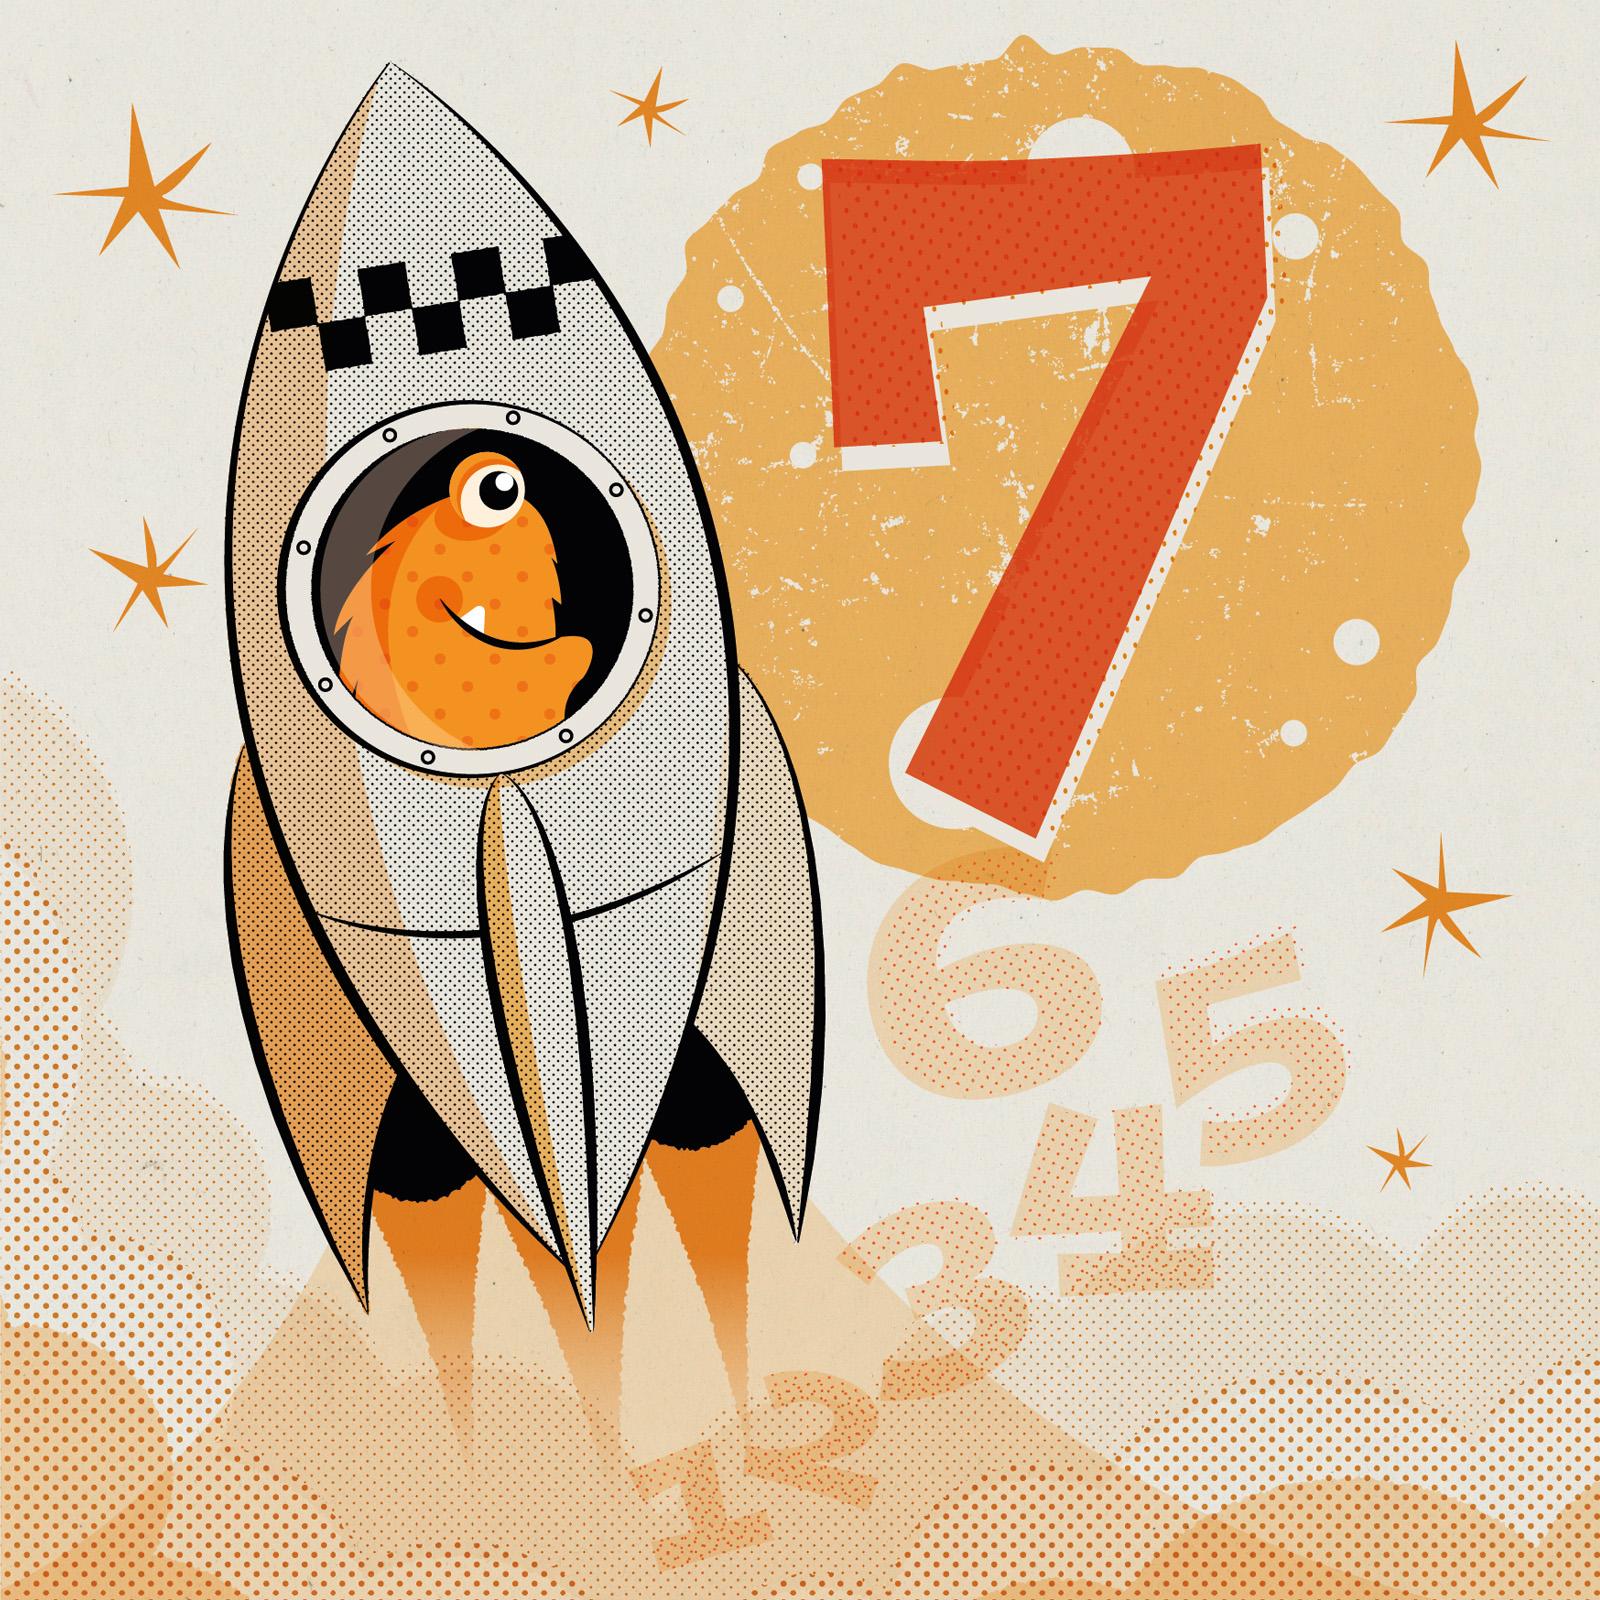 orange furry alien blasting off in a grey retro 50s style rocket behind is an orange number 7 planet with a launch countdown underneath in pale orange